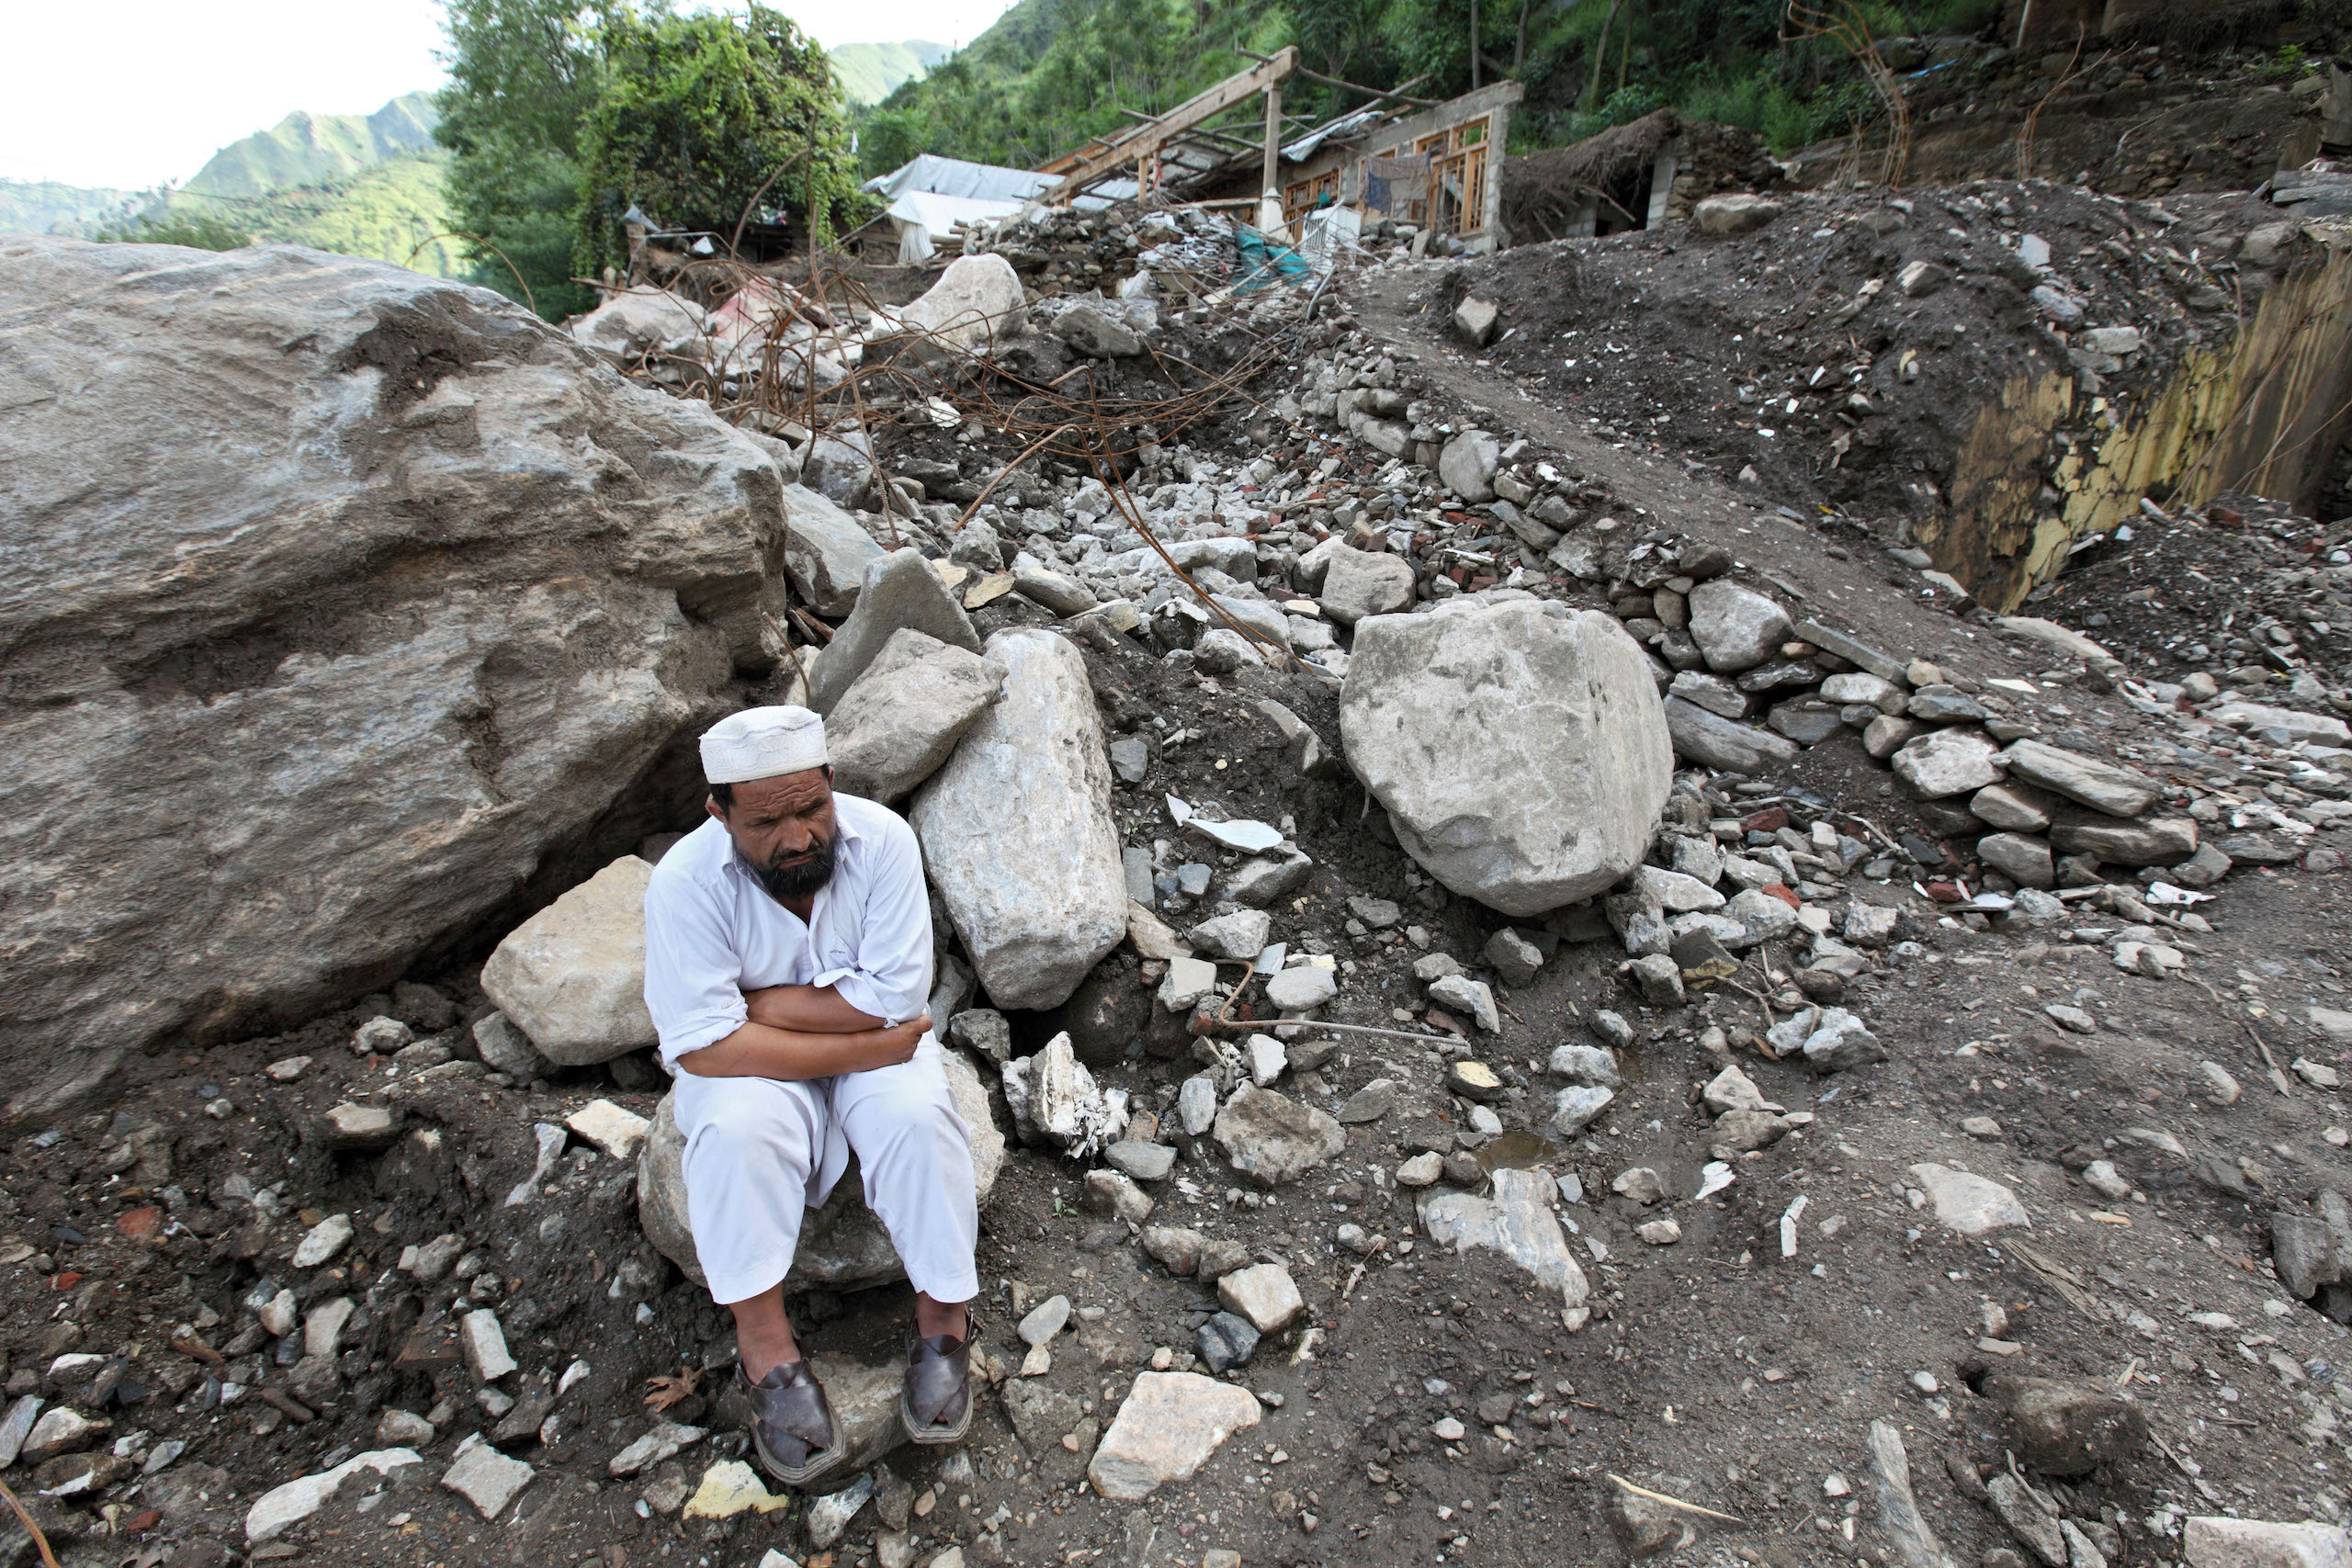 <p>A man sits in front of the ruins of his house, which was destroyed by a flood in 2010 in Khyber Pakhtunkhwa, northern Pakistan. The trauma of disasters like floods can lead people to develop conditions such as post-traumatic stress disorder, depression and anxiety. (Image: Alamy)</p>